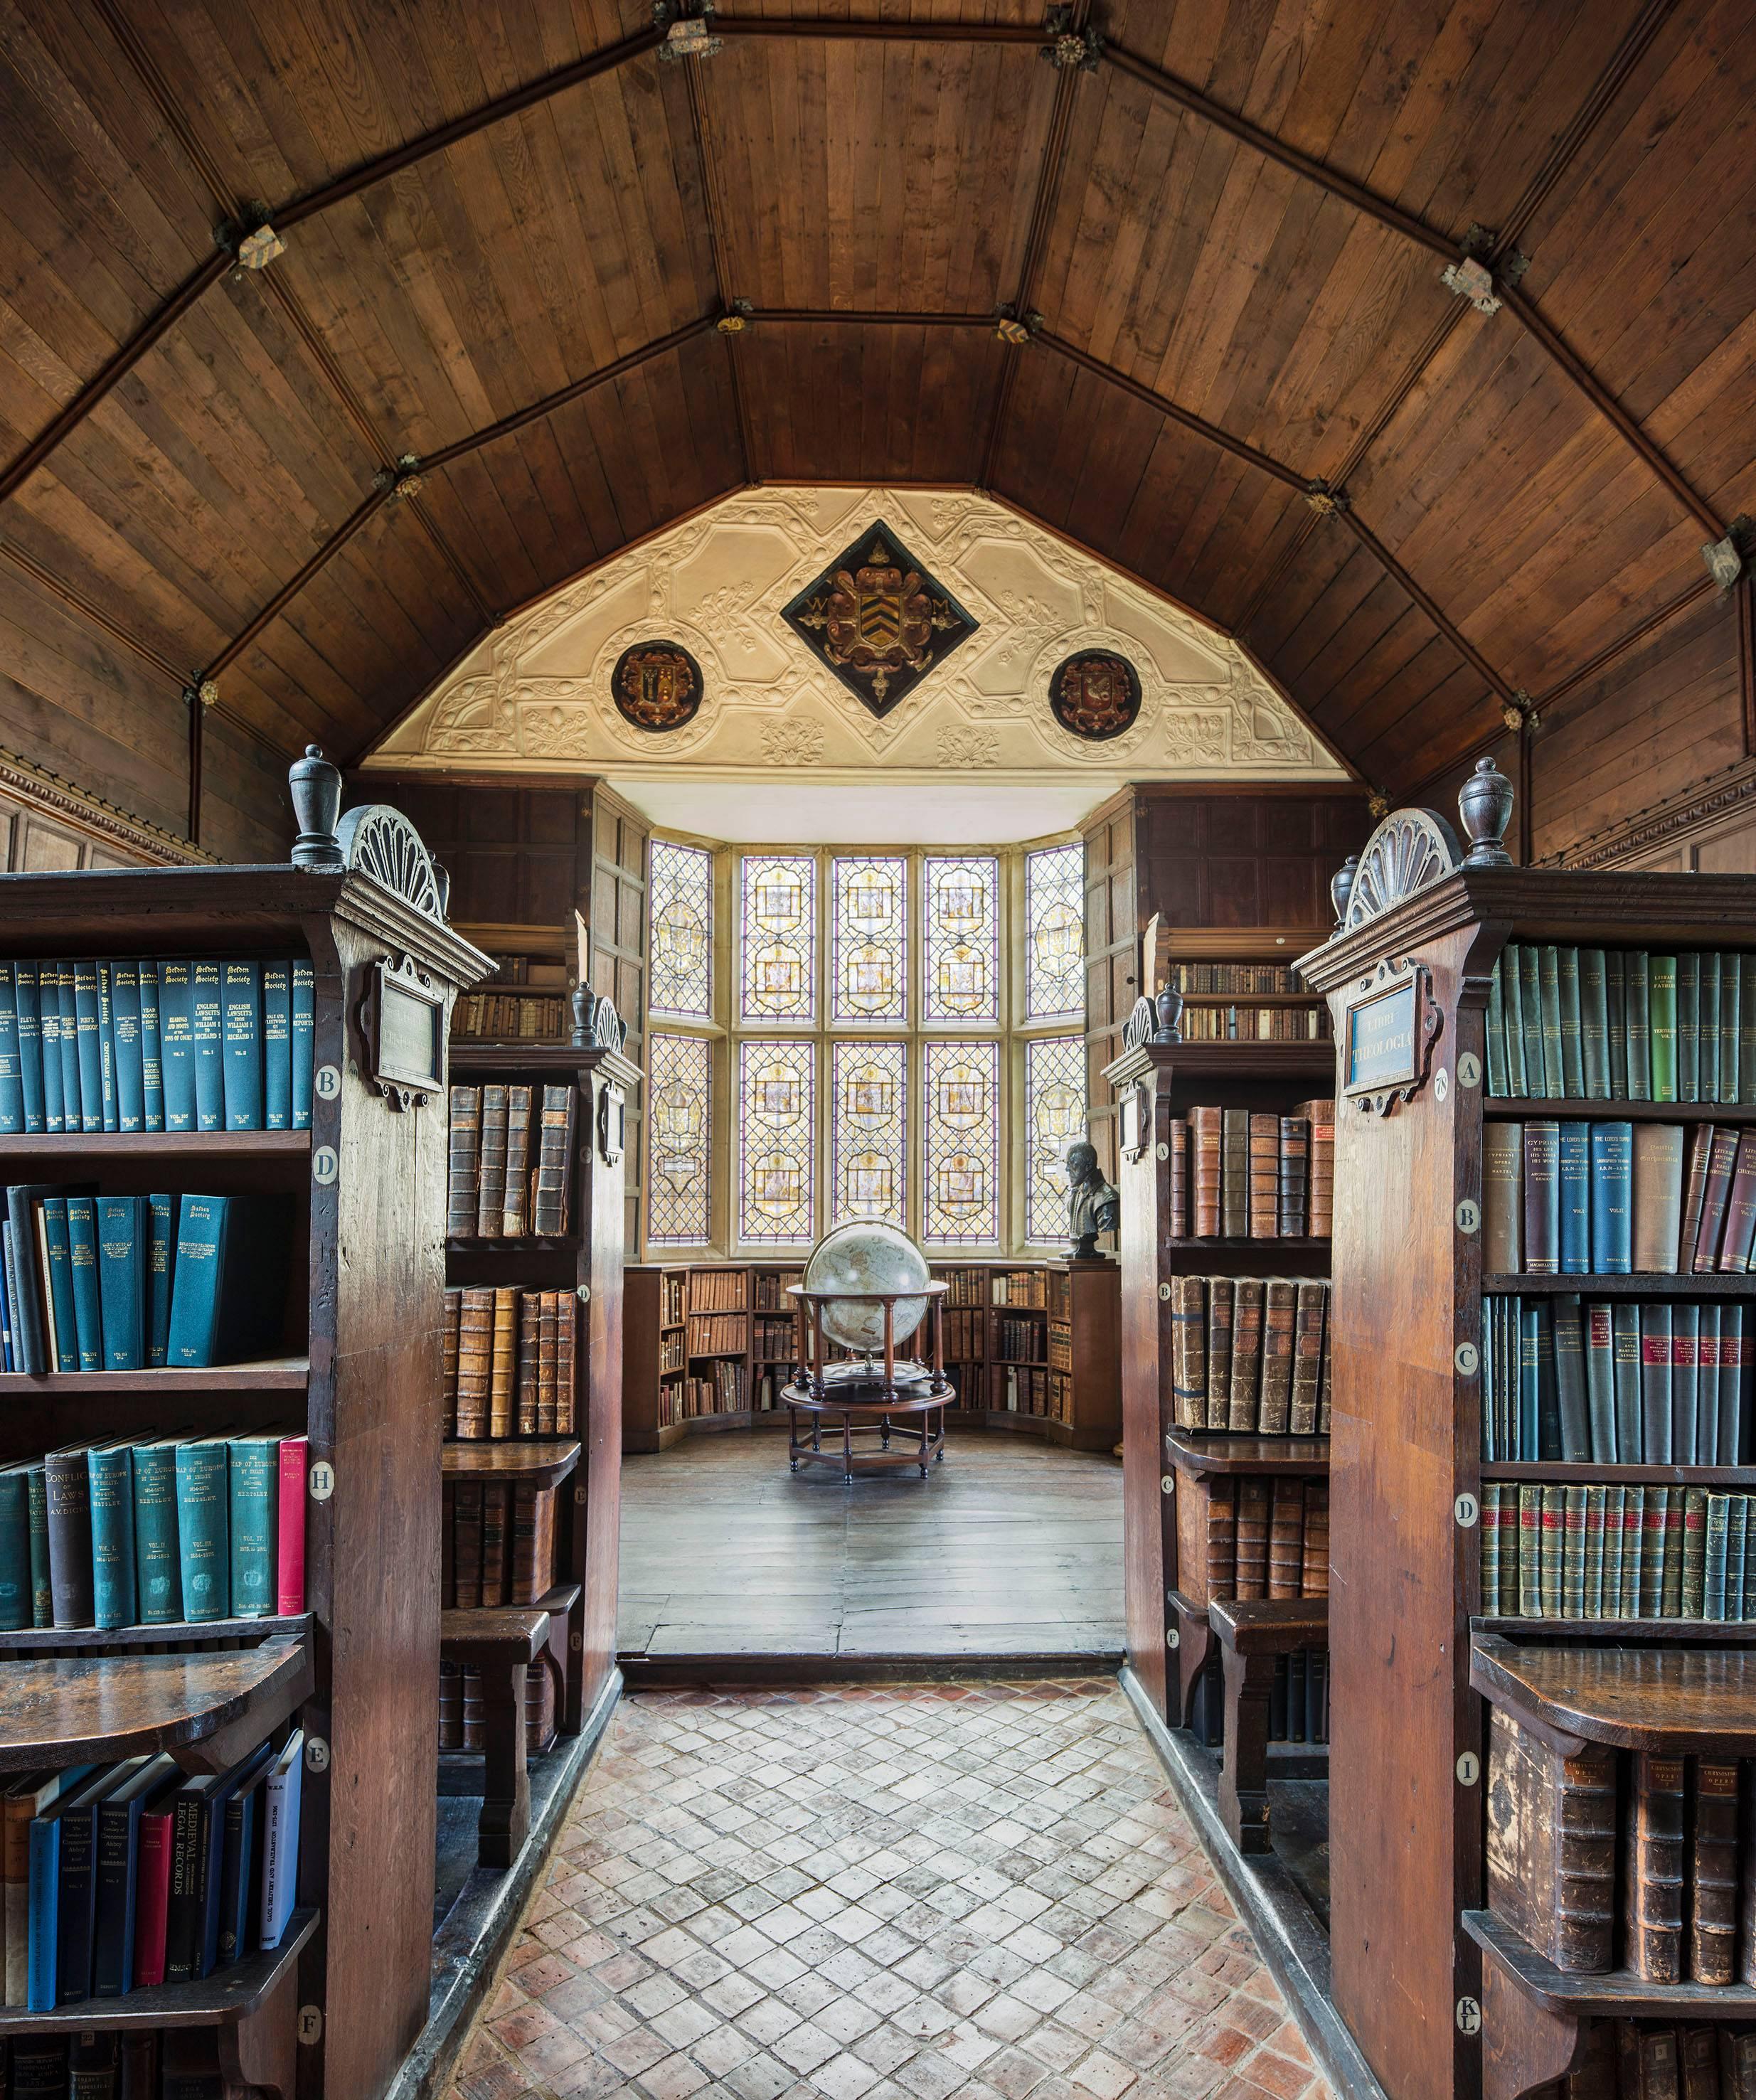 The Blue Books, Upper Library, Oxford, England